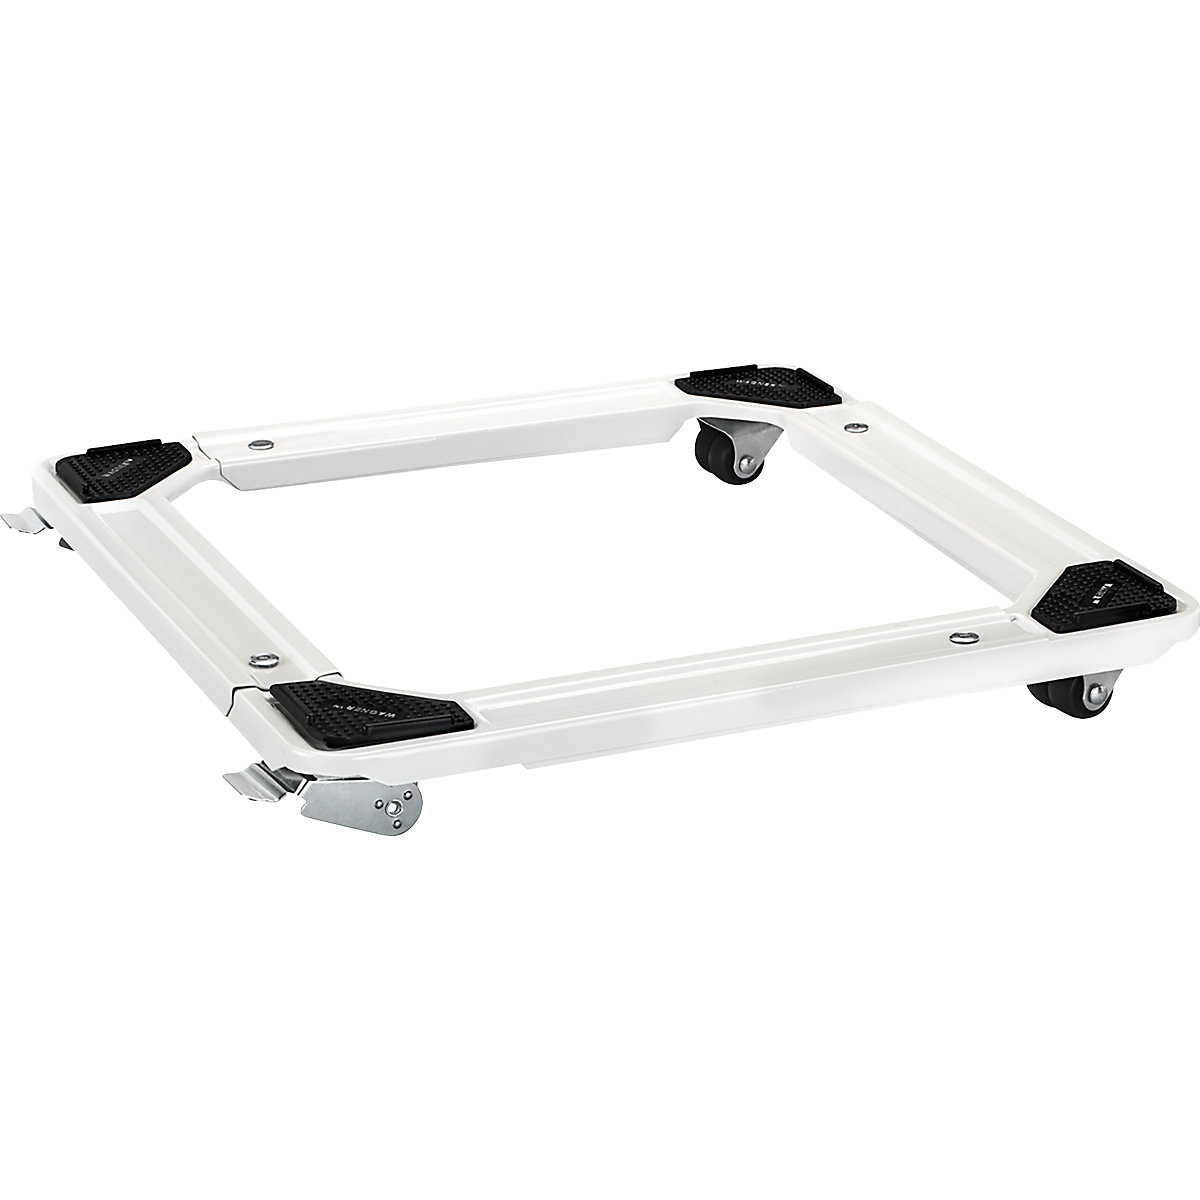 MM 1192 transport dolly – Wagner, LxW 420 x 420 mm, extends to 600 x 600 mm, pack of 2, max. load 150 kg, 2+ packs-4